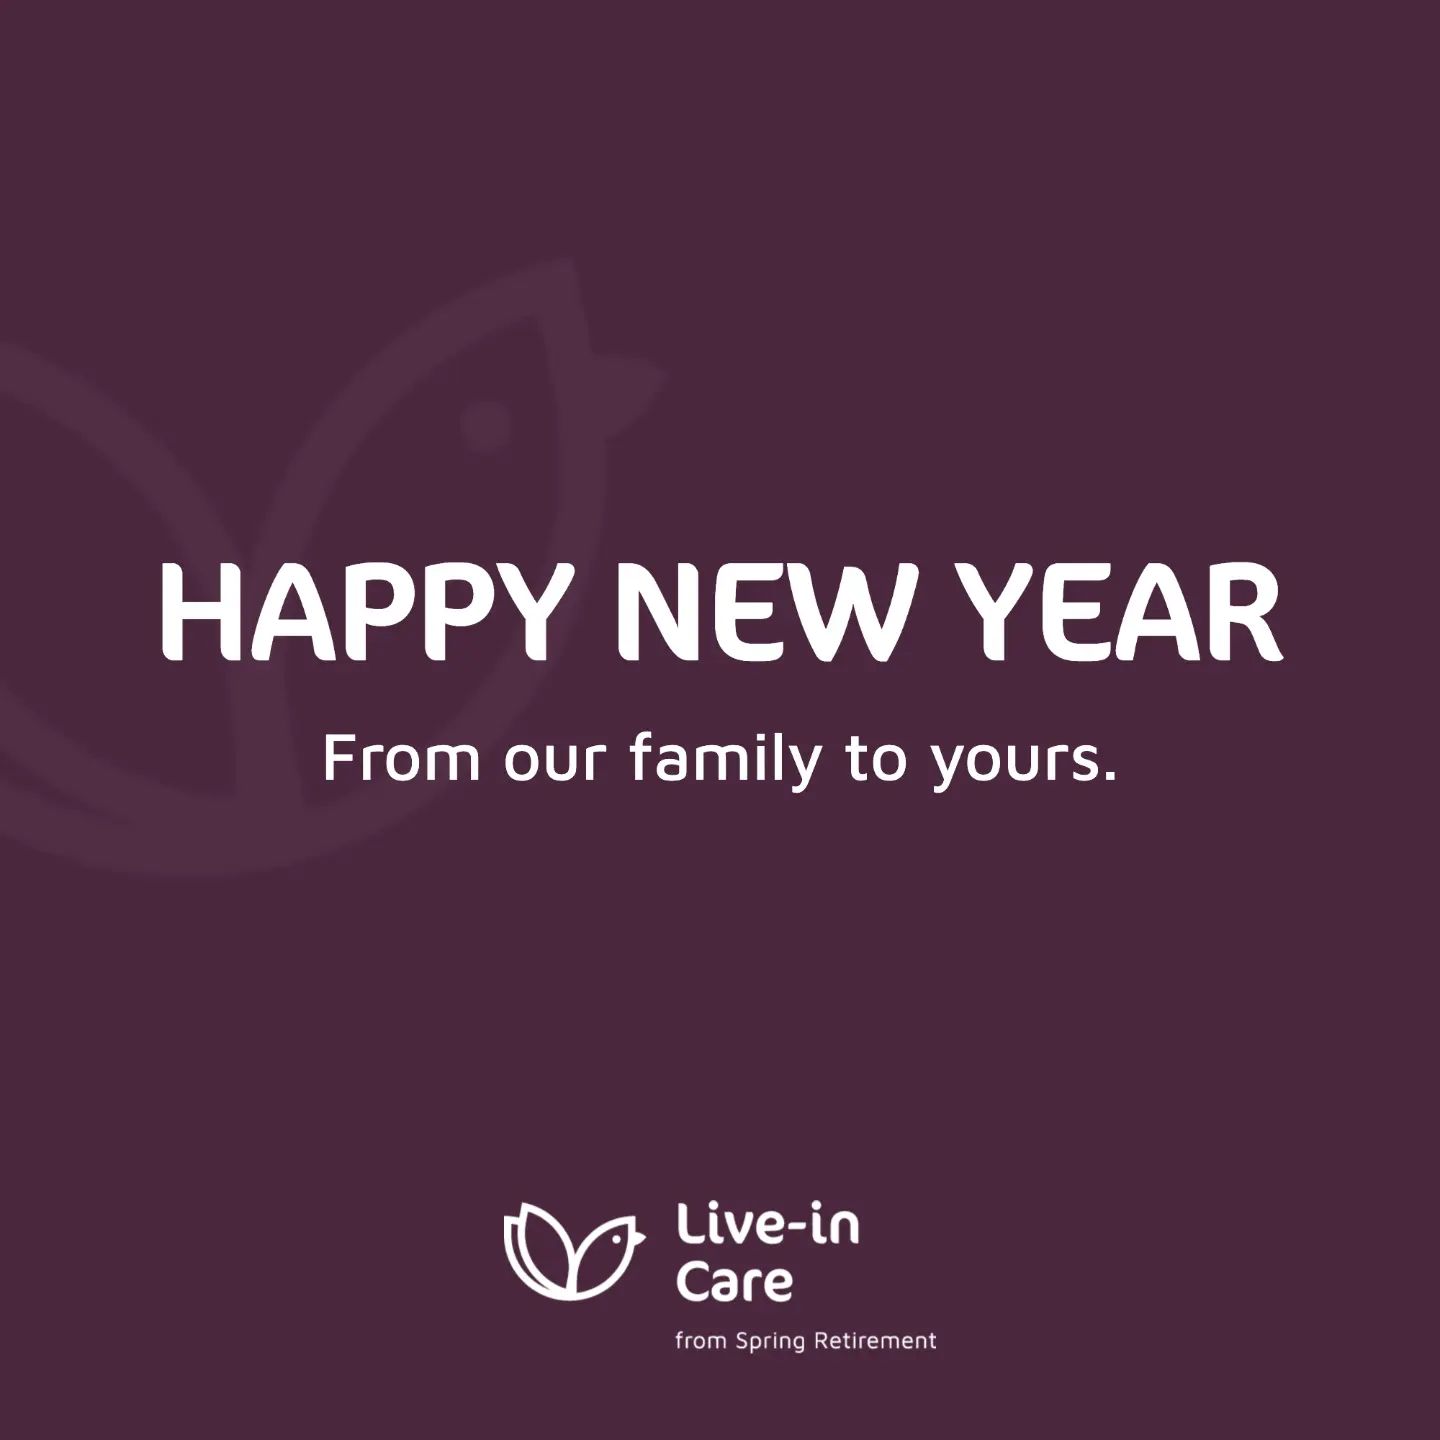 Happy new year message from spring live in care